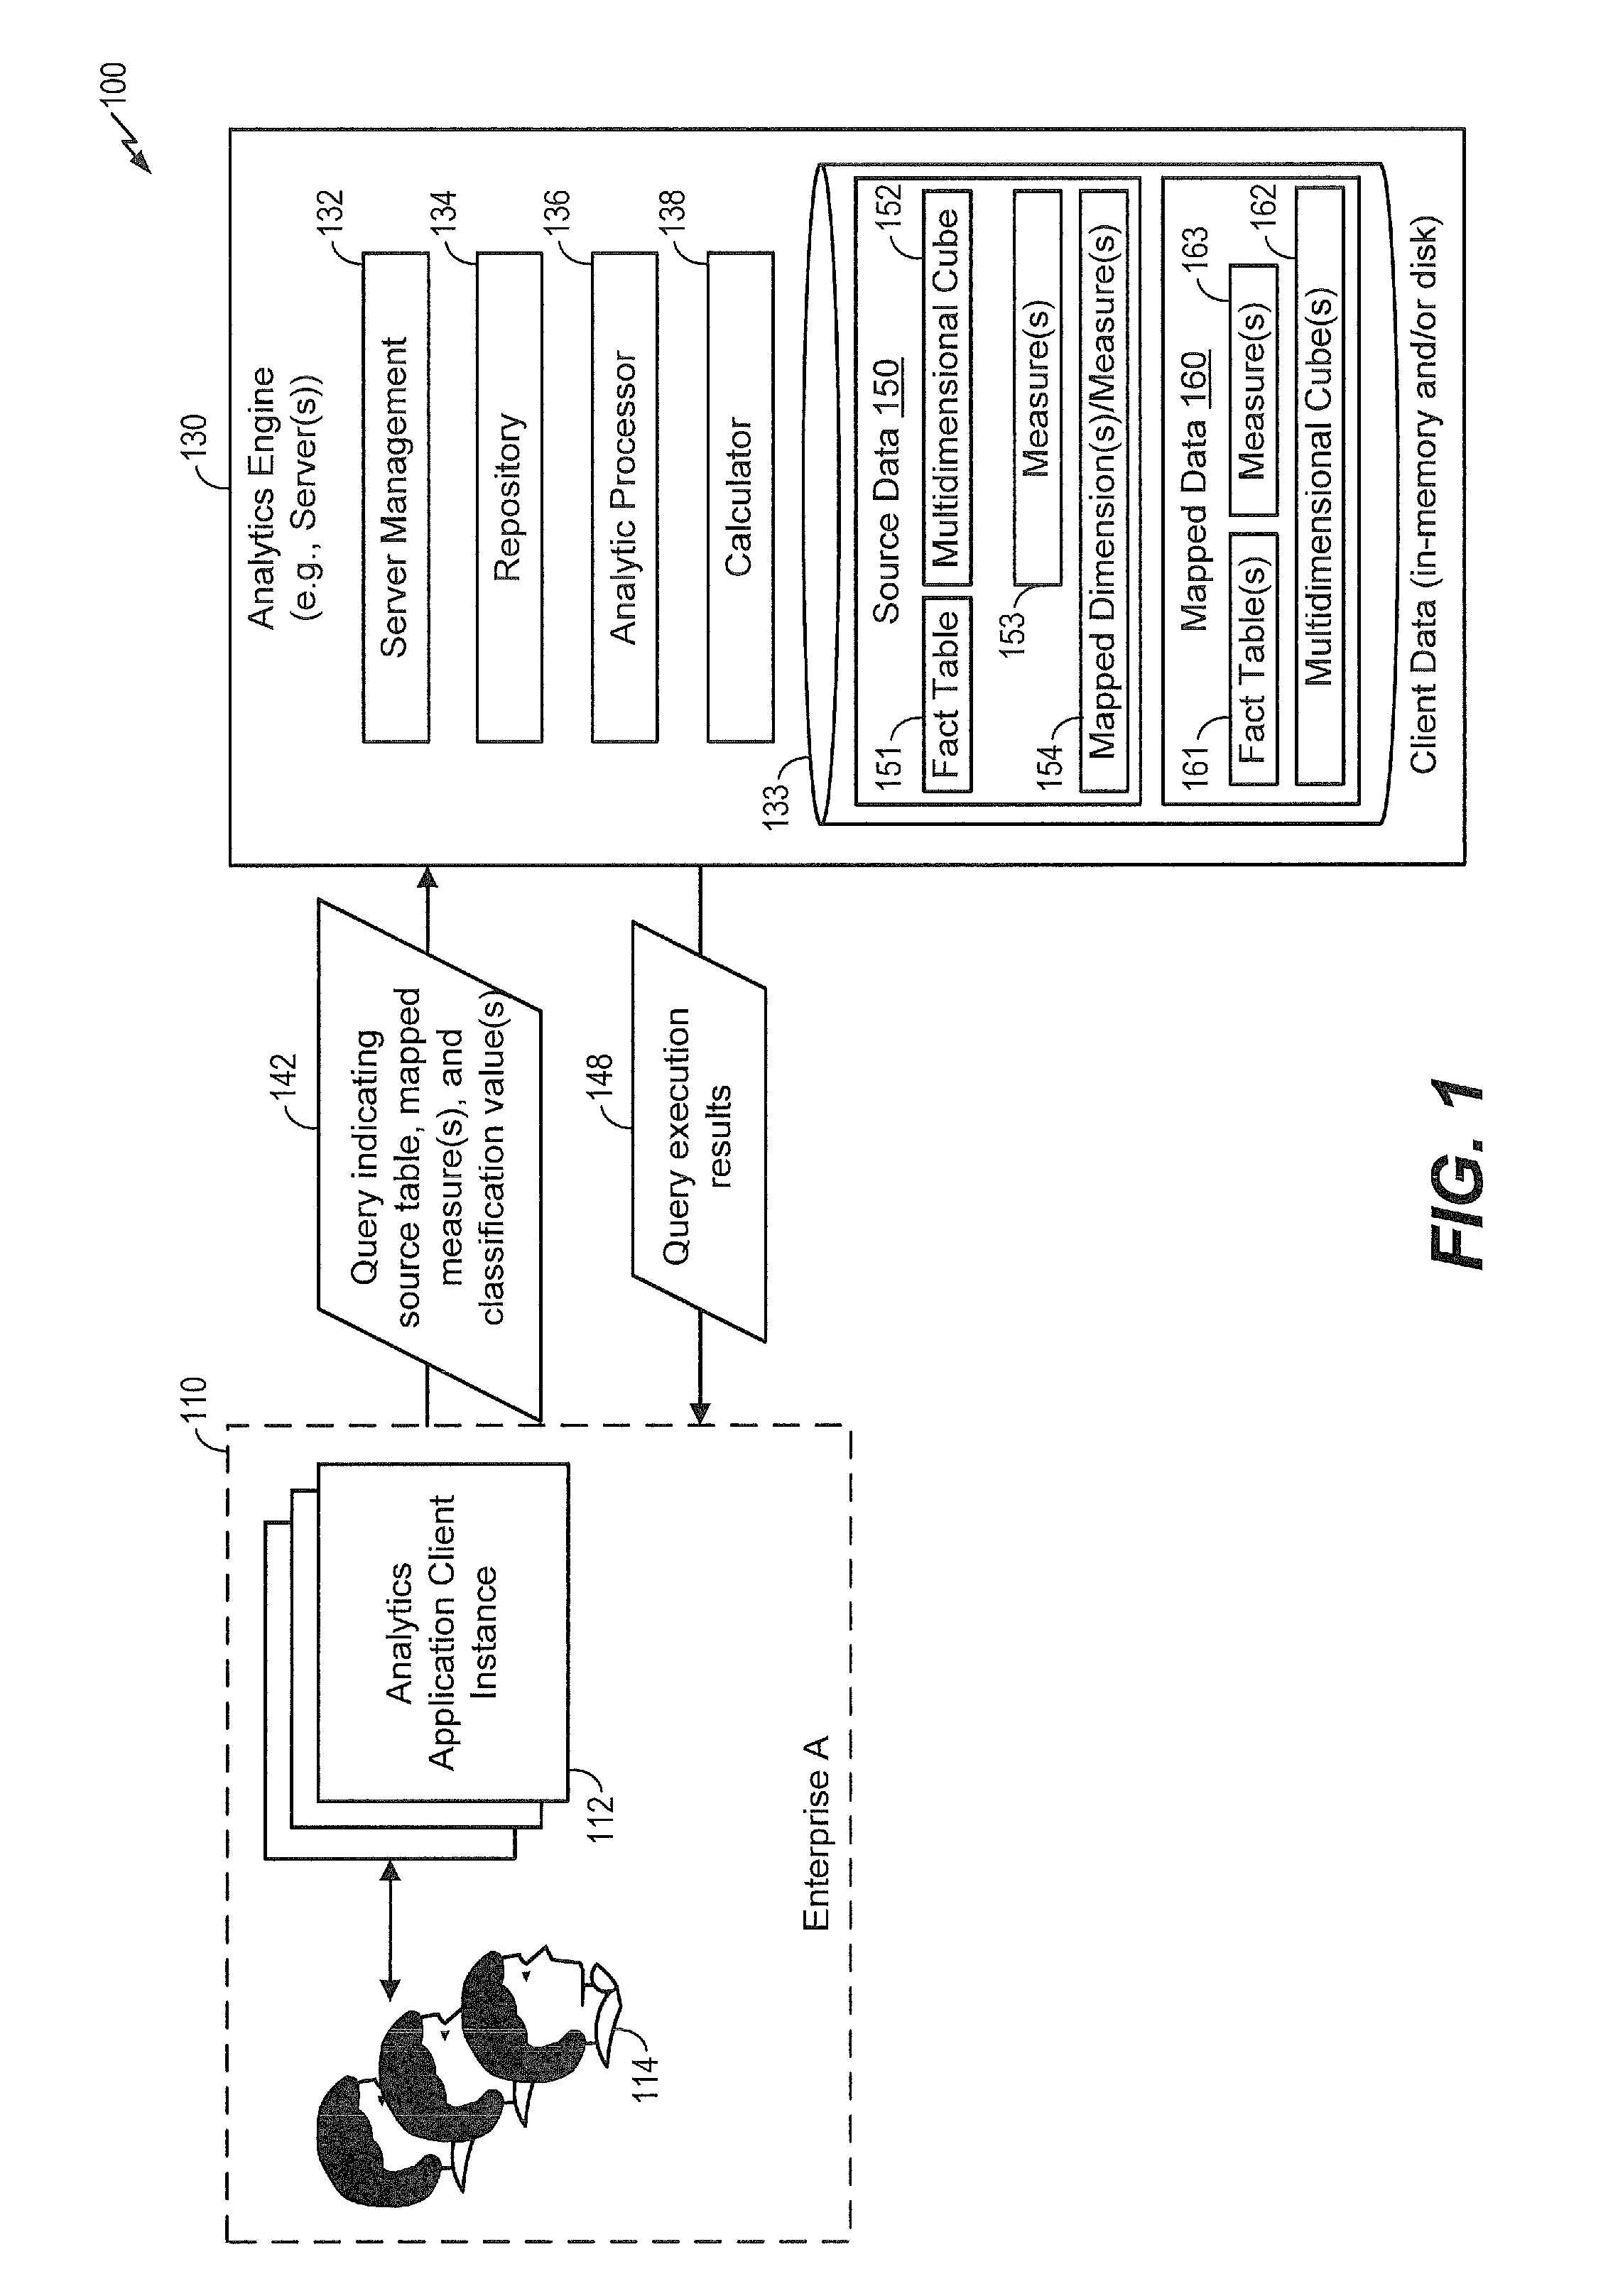 Systems and methods of mapping multidimensional data and executing queries